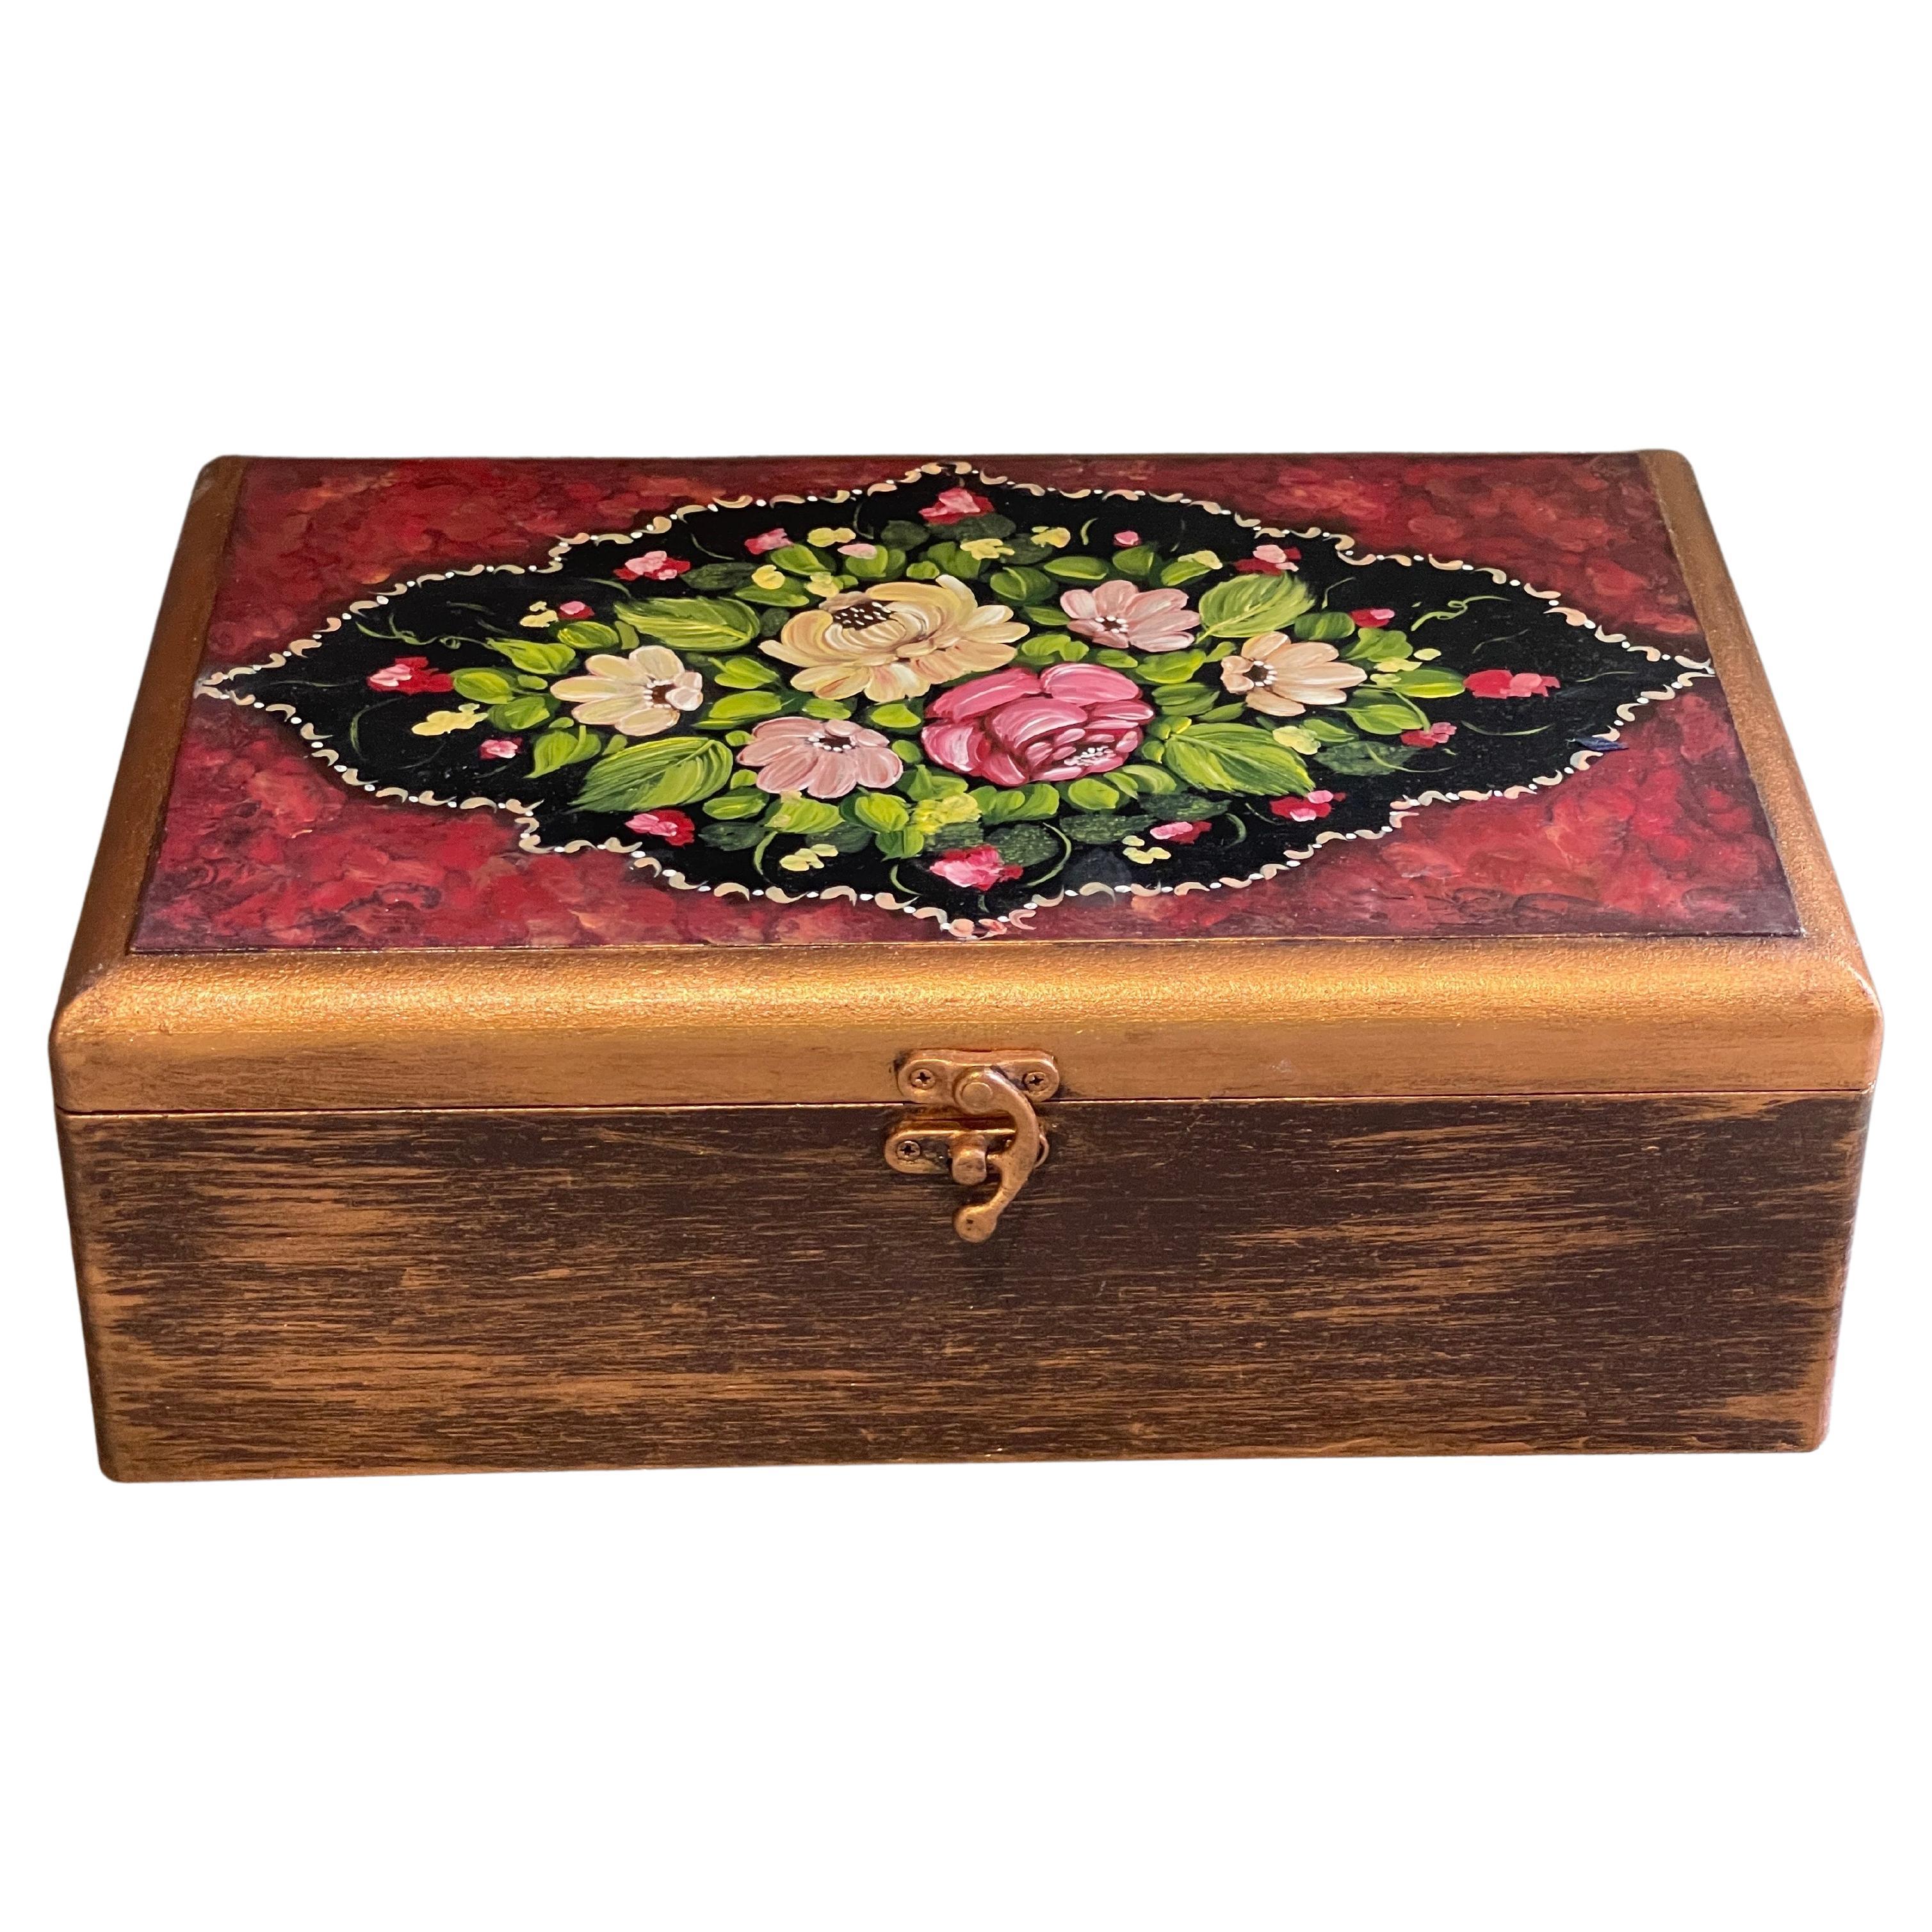 Vintage wooden Tea Caddy Box Conch Shell Oriental Flower and Chicken Hand Painting 
Impressive Flame Brown Mahogany Double Tea Caddy of Outstanding Quality, Workmanship, and compact size. Circa 1970.
The hinged lid is banded in satinwood, fabulously